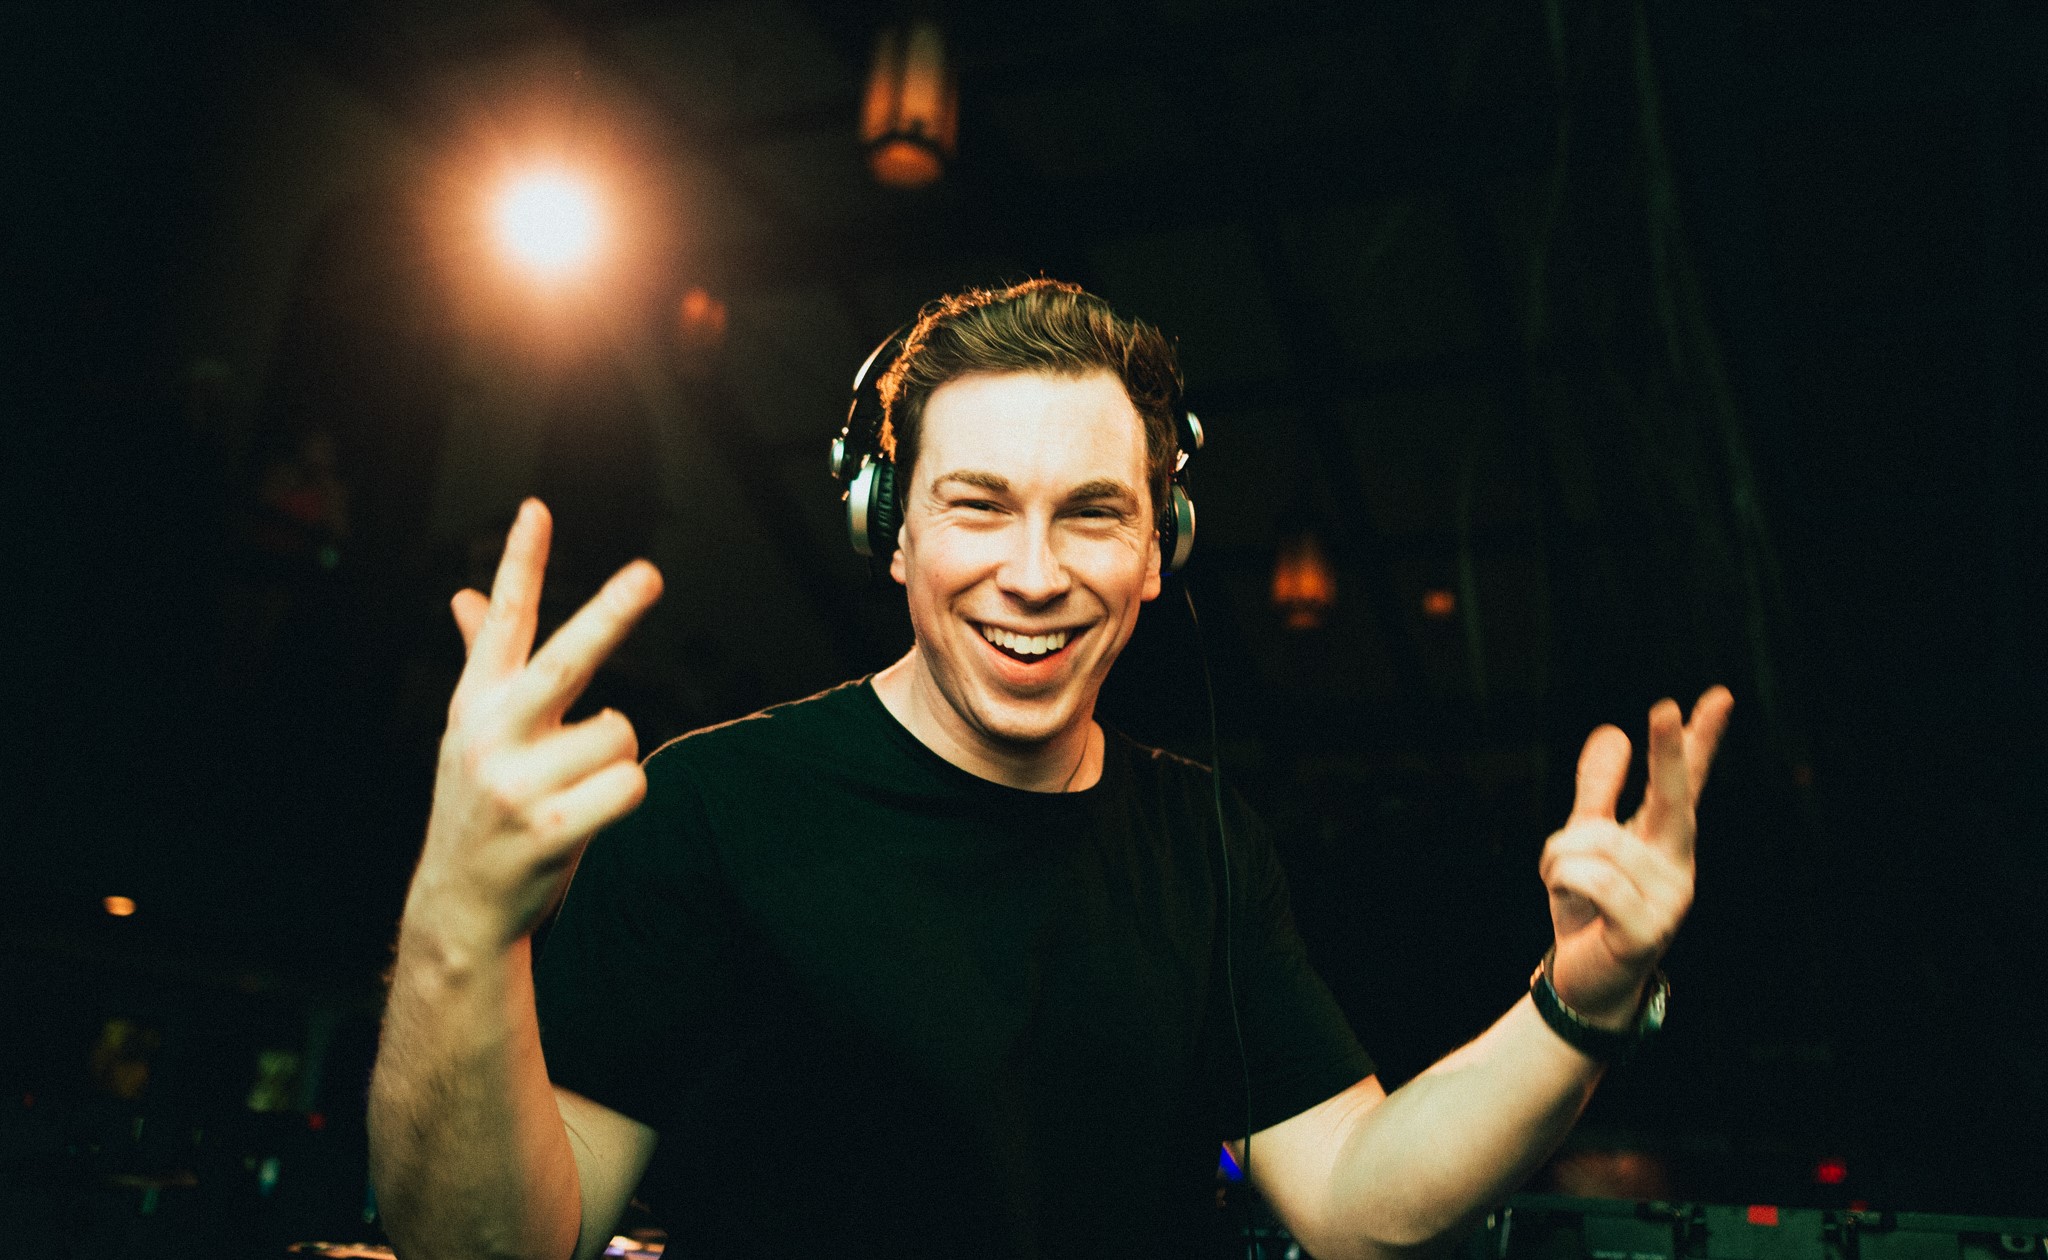 Hardwell Production Videos & Co On His YT Channel